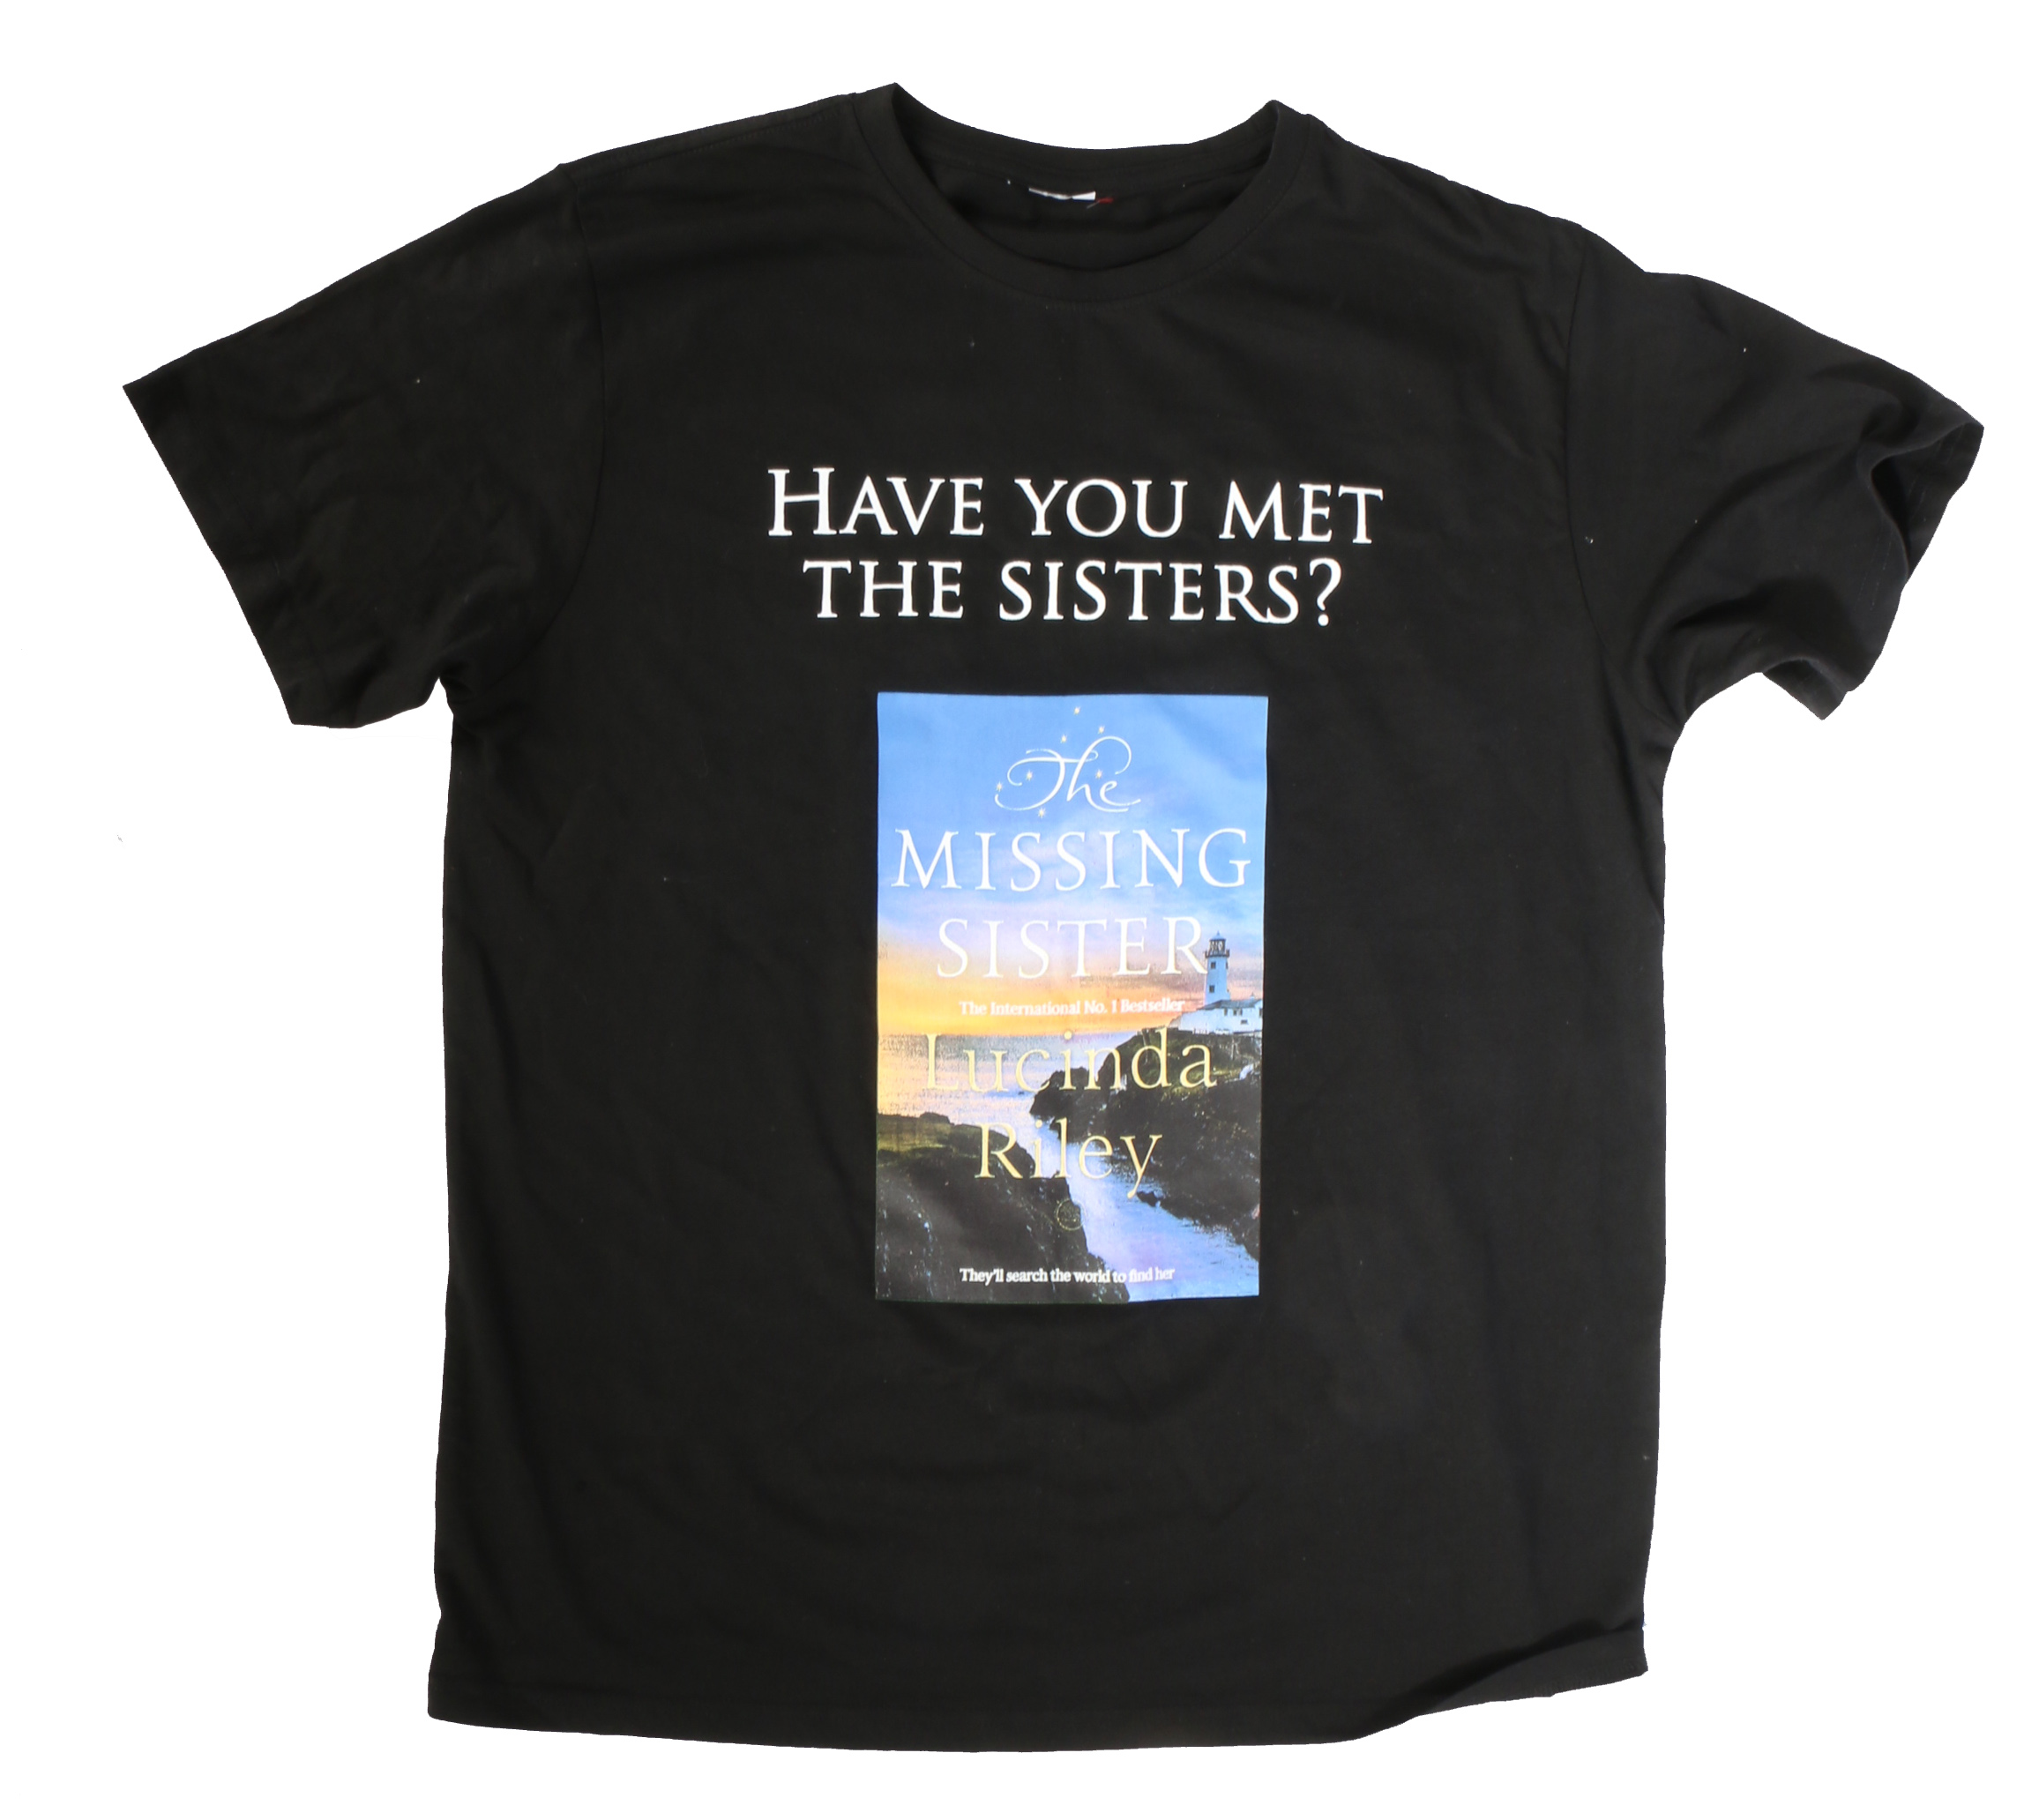 A large ‘Missing Sister’ t-shirt, with an illustration of the book printed to the chest